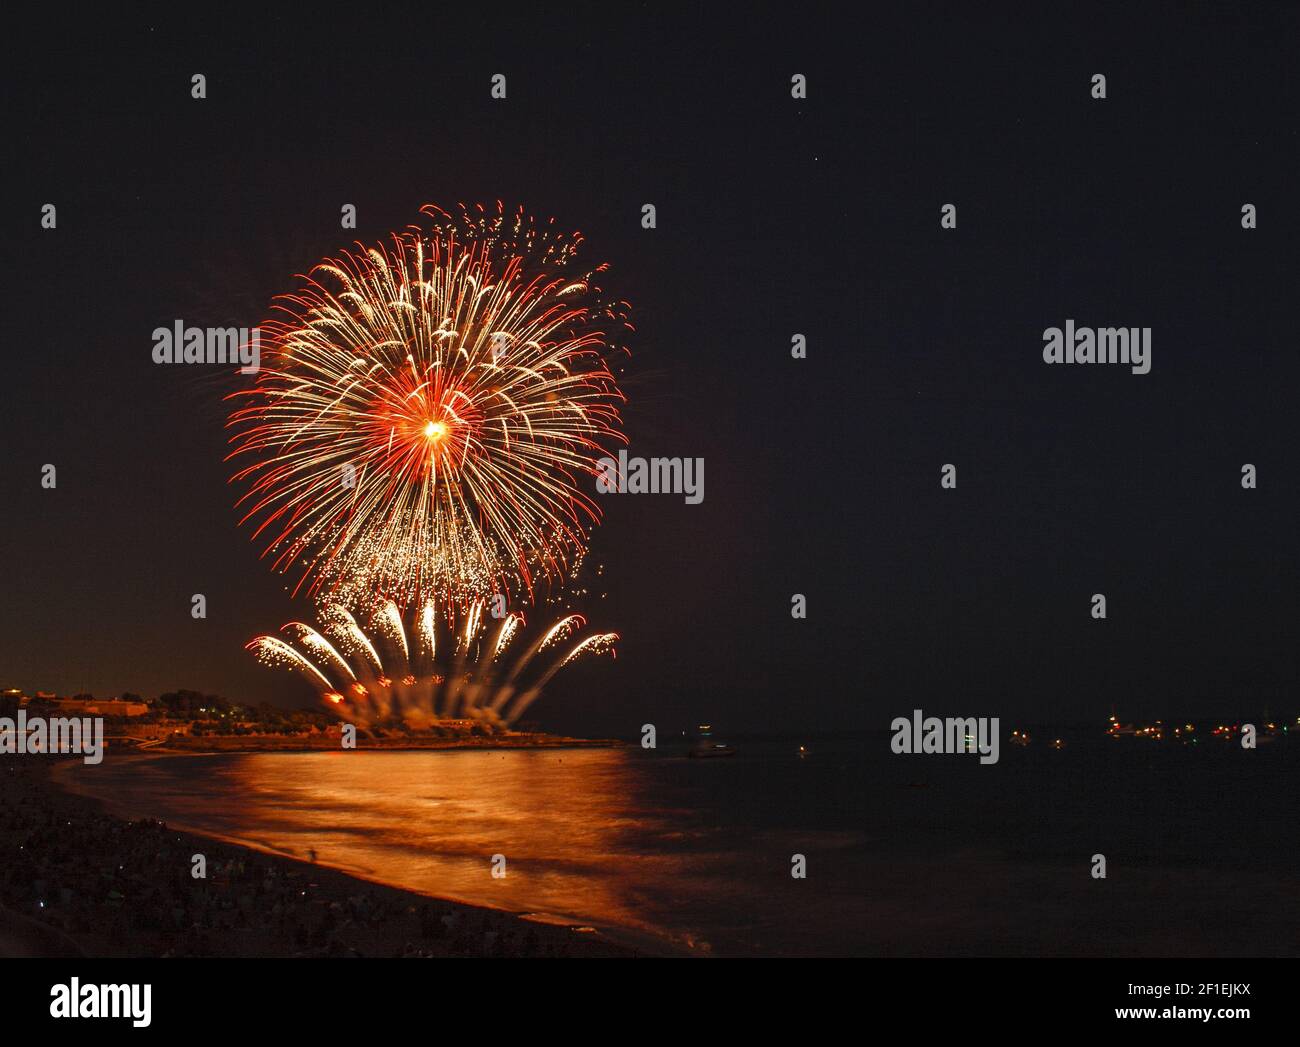 Fireworks display over sea with reflections Stock Photo